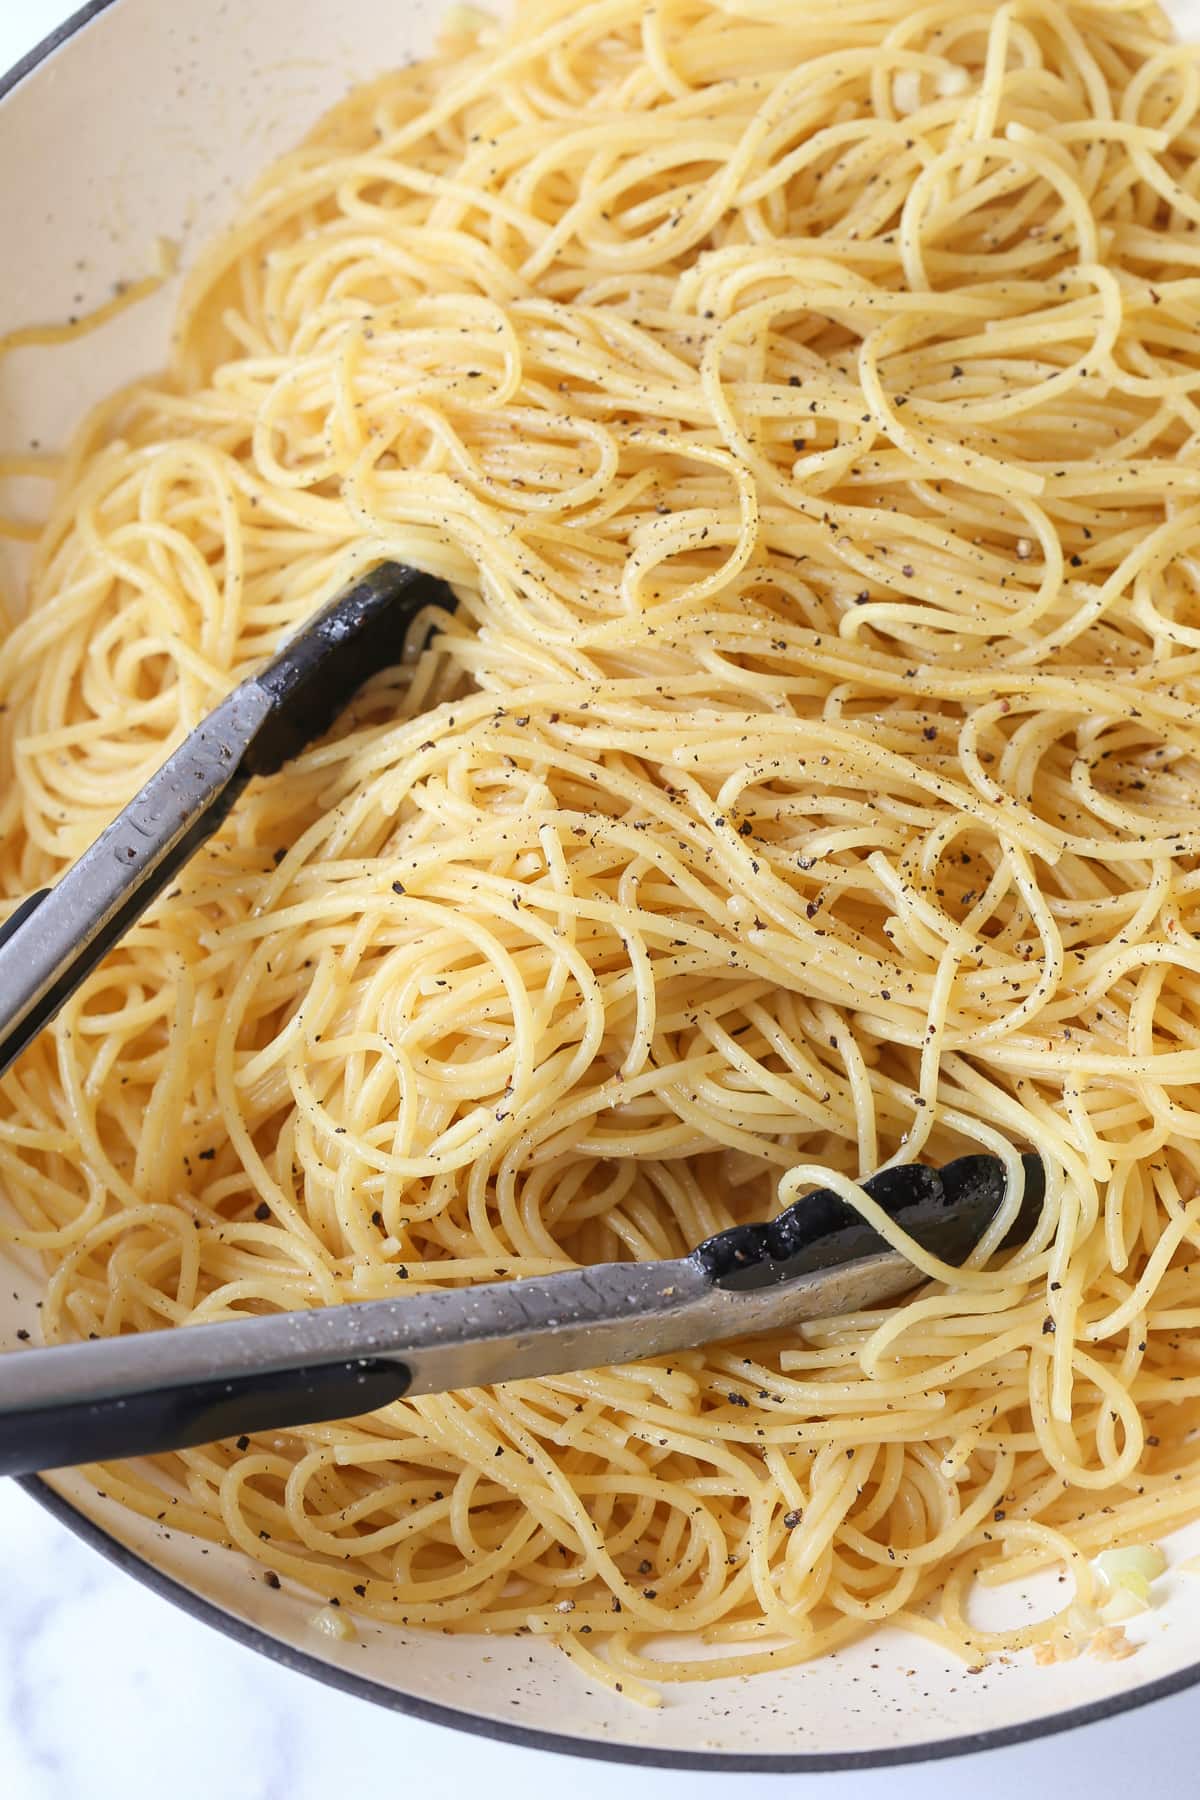 Spaghetti with ground pepper and tongs